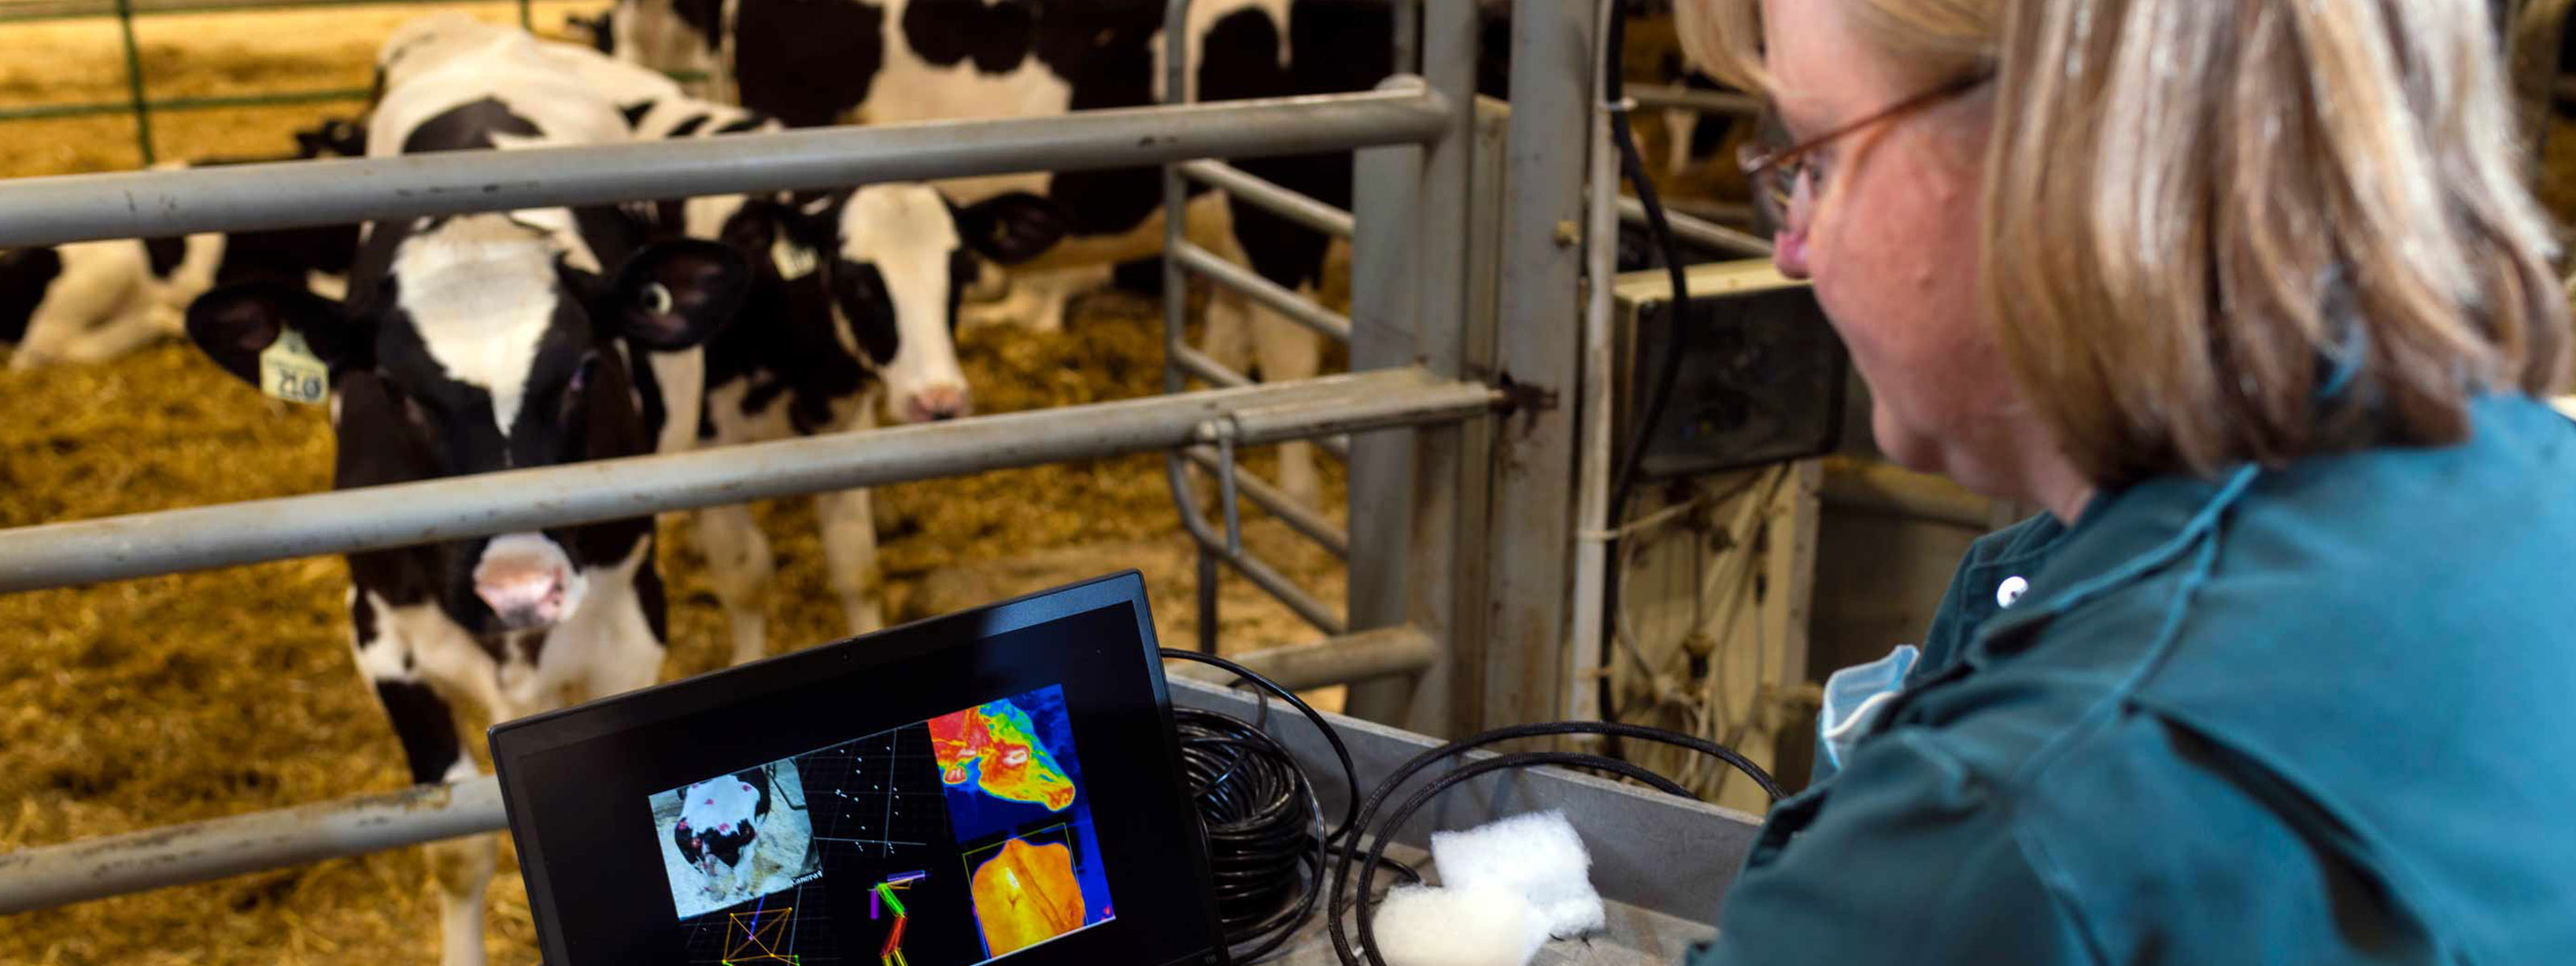 An agricultural researcher examines data from an experiment involving cattle.